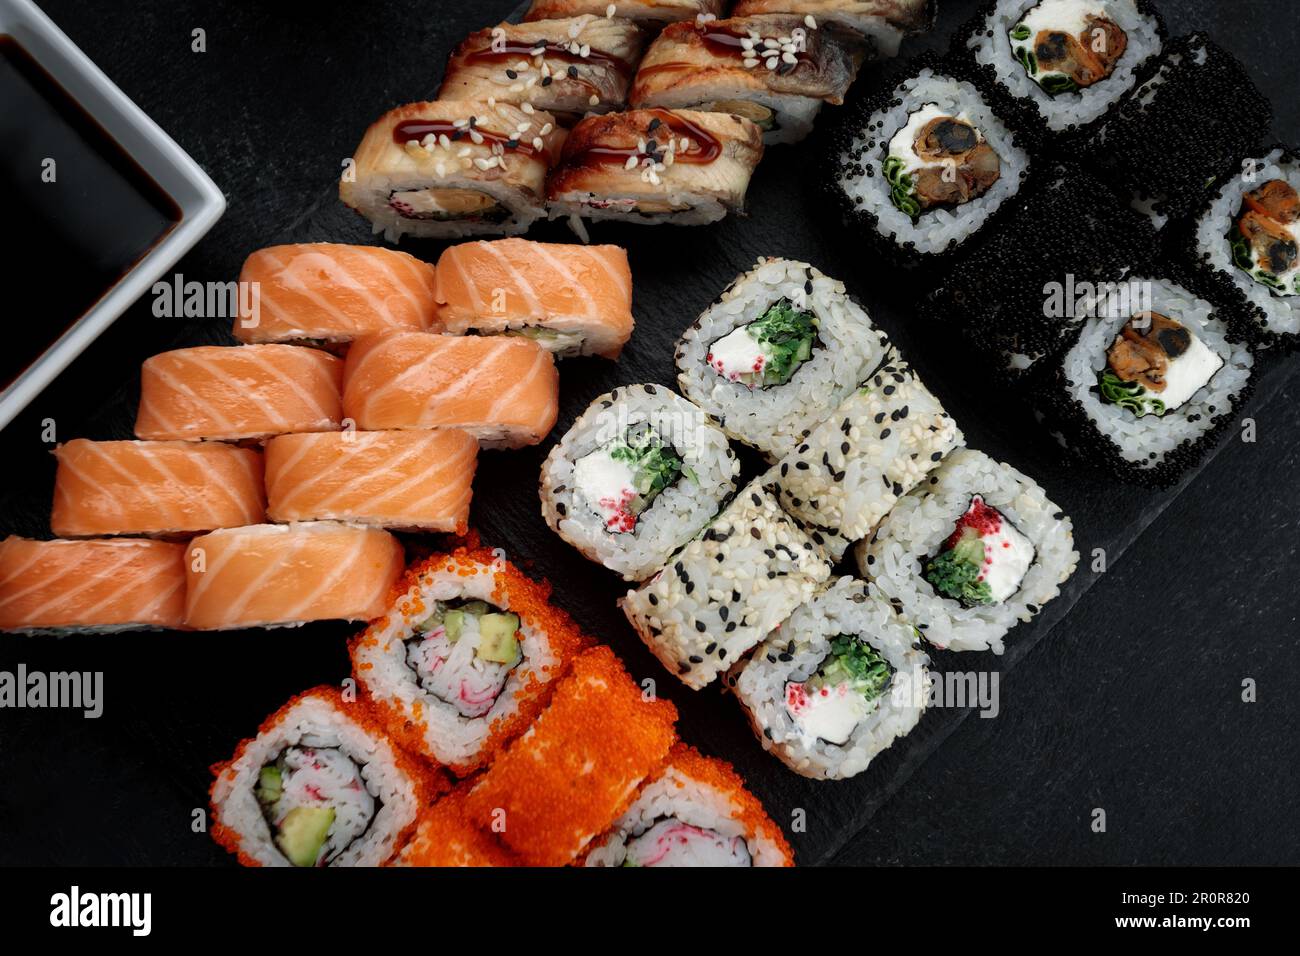 Delectable sushi set with a range of rolls and sauces Stock Photo